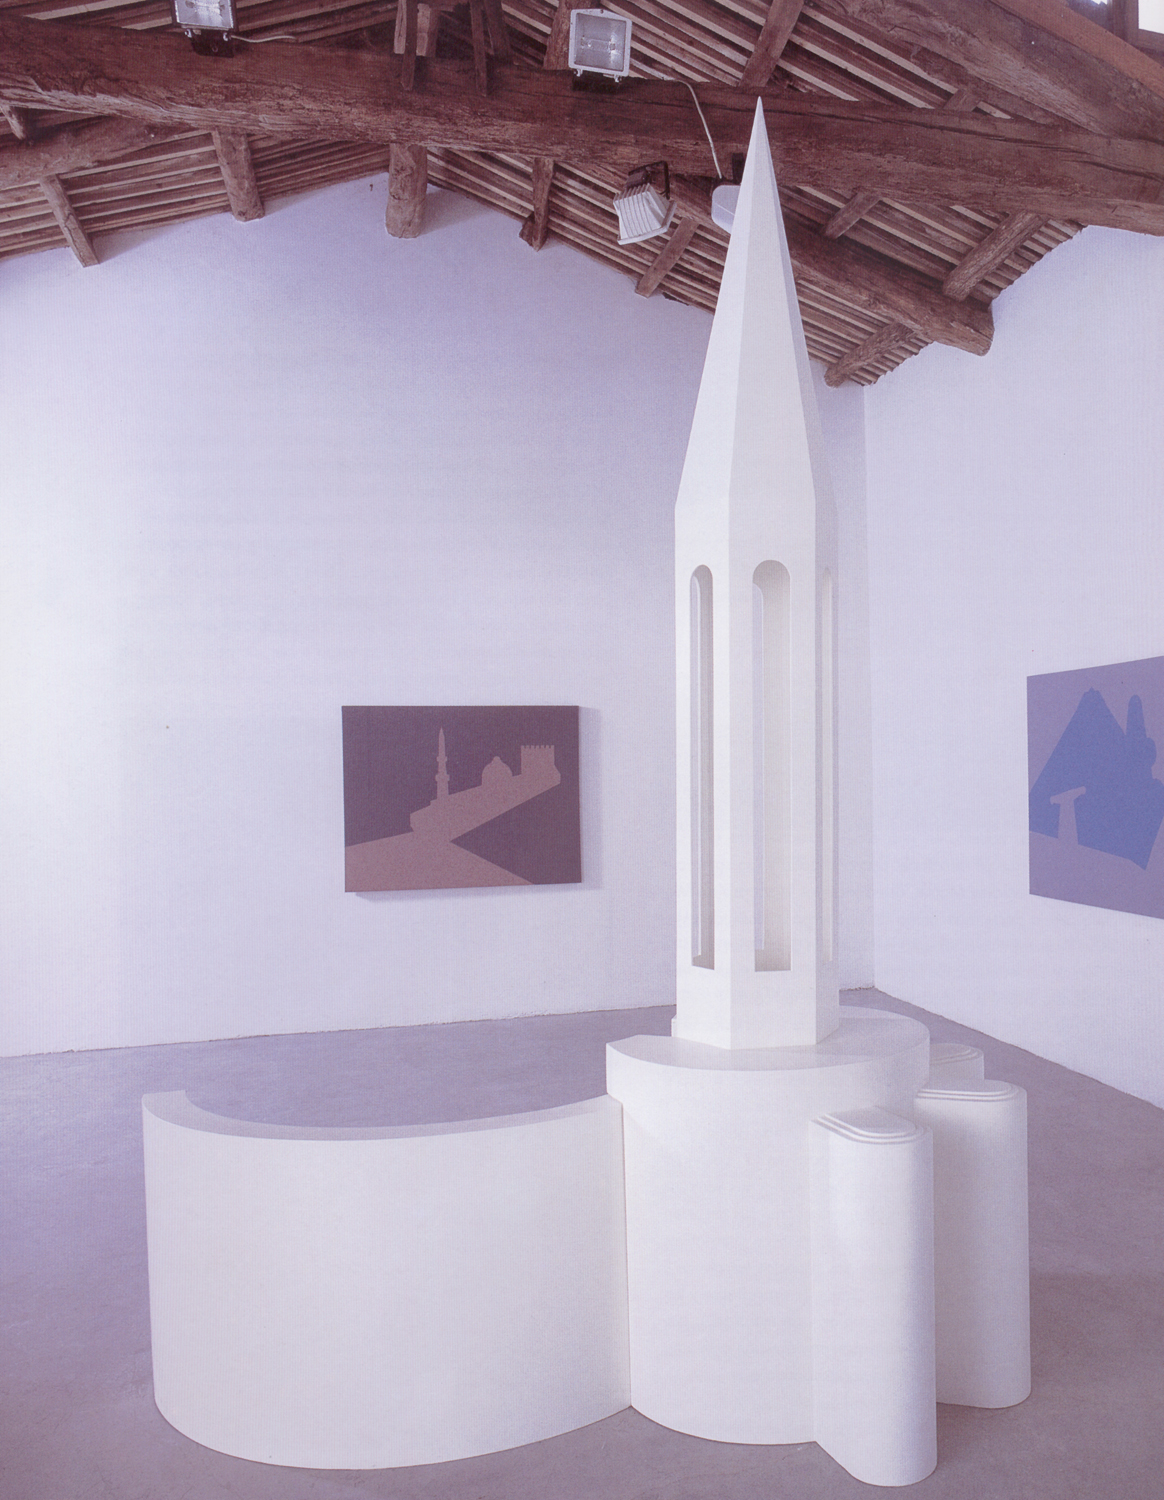   Reconfigured Monuments, 2001, sculpture:
painted wood, 210 x 150 x 270 cm and three paintings: acrylic on canvas,140 x
110 cm. Installation view , Marco Noire Contemporary Arts Gallery, Turin,
Italy, 2002. Courtesy: The Modern Art Gallery (GAM), Tu